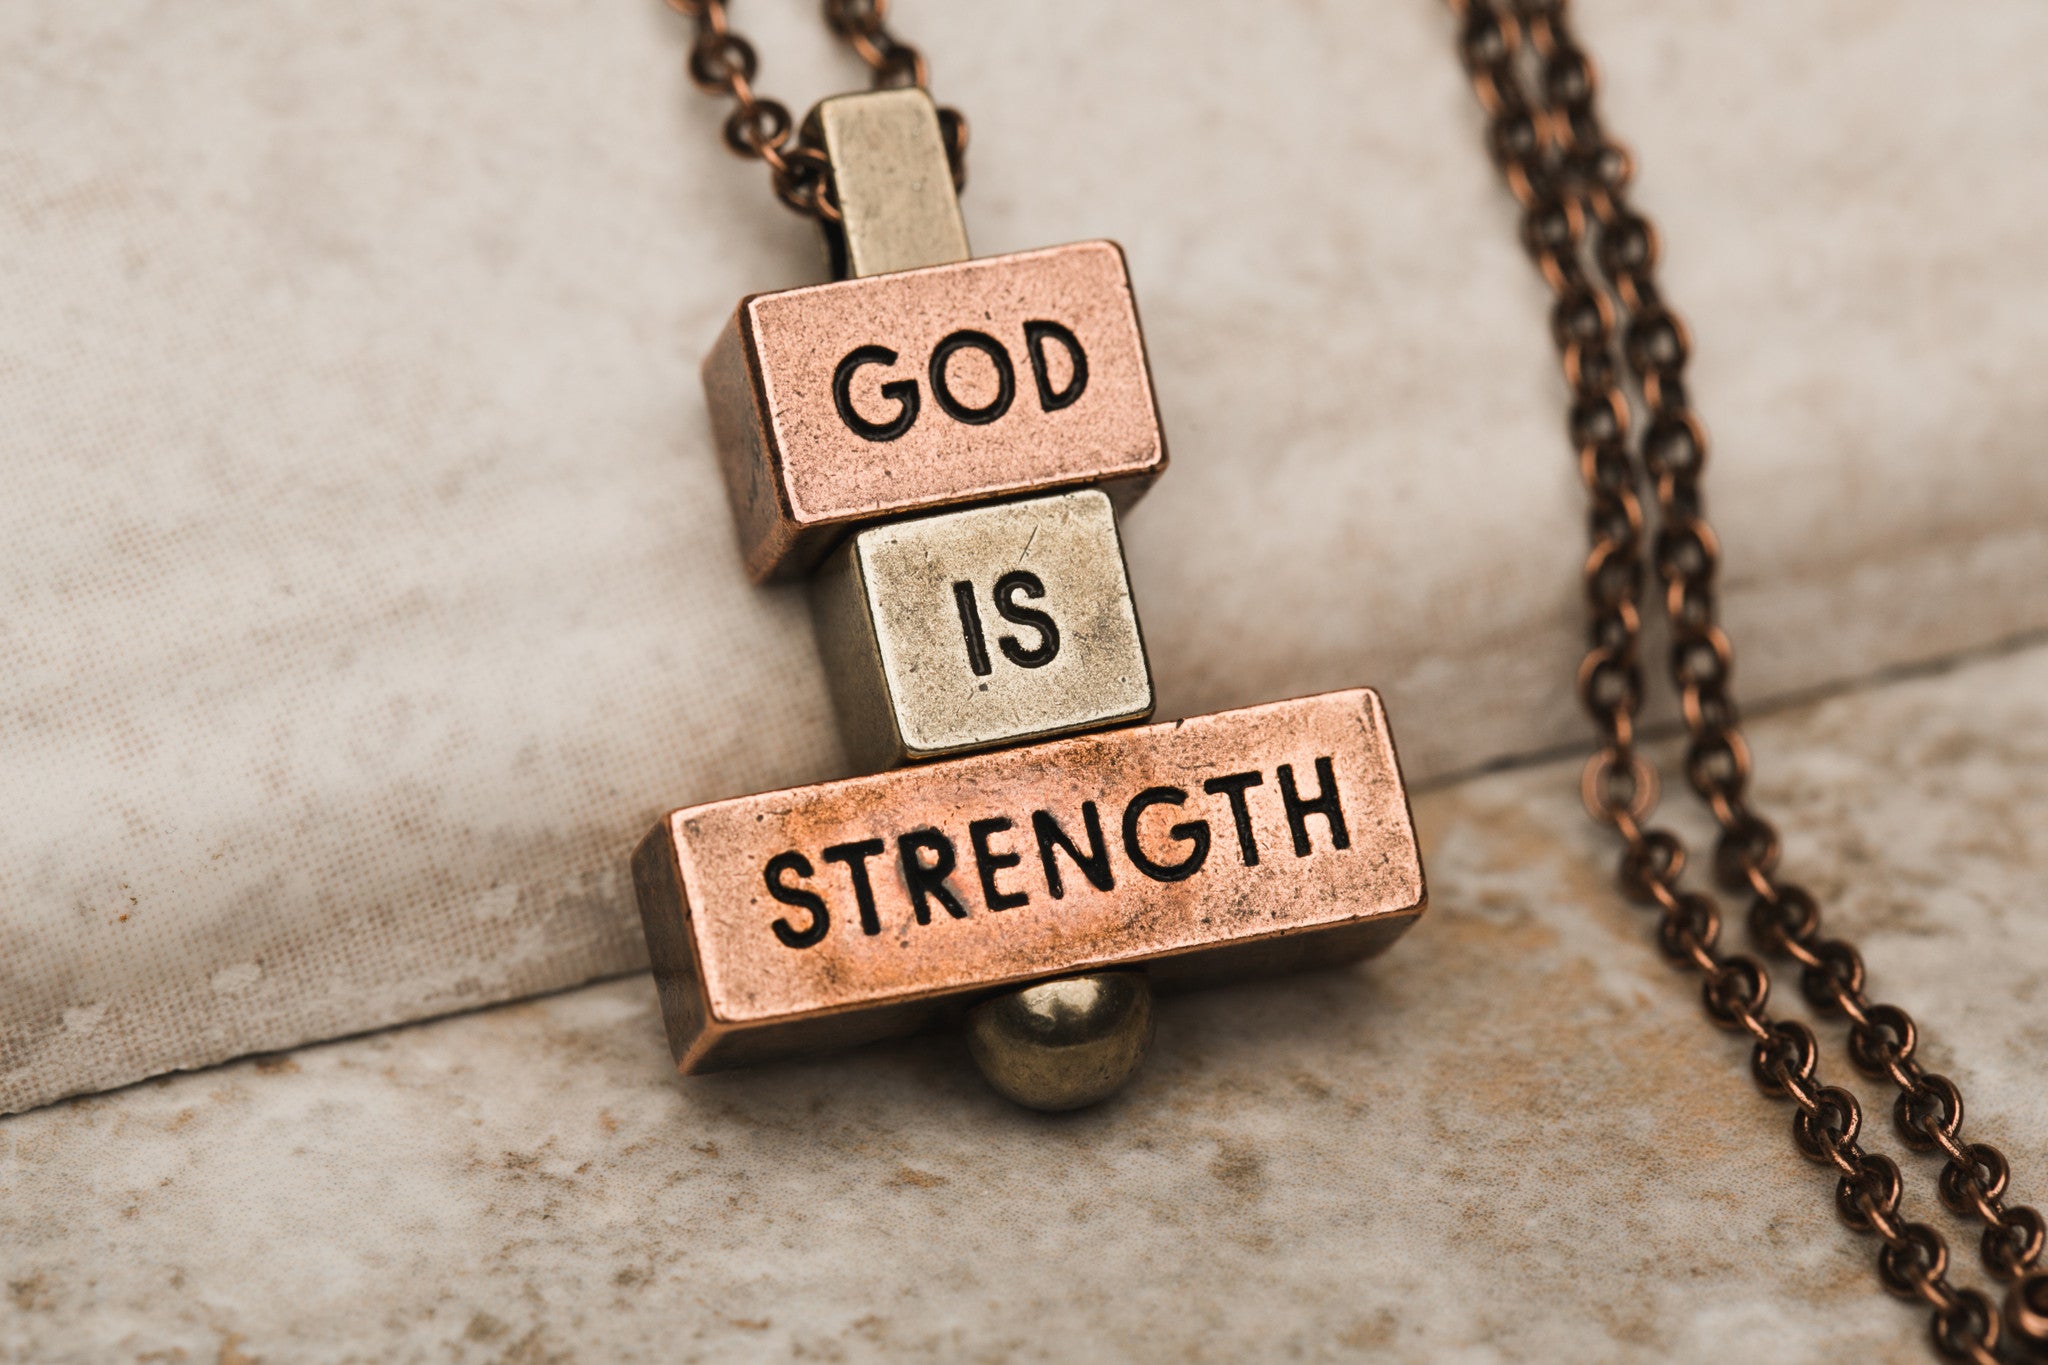 God is Strength 212 west